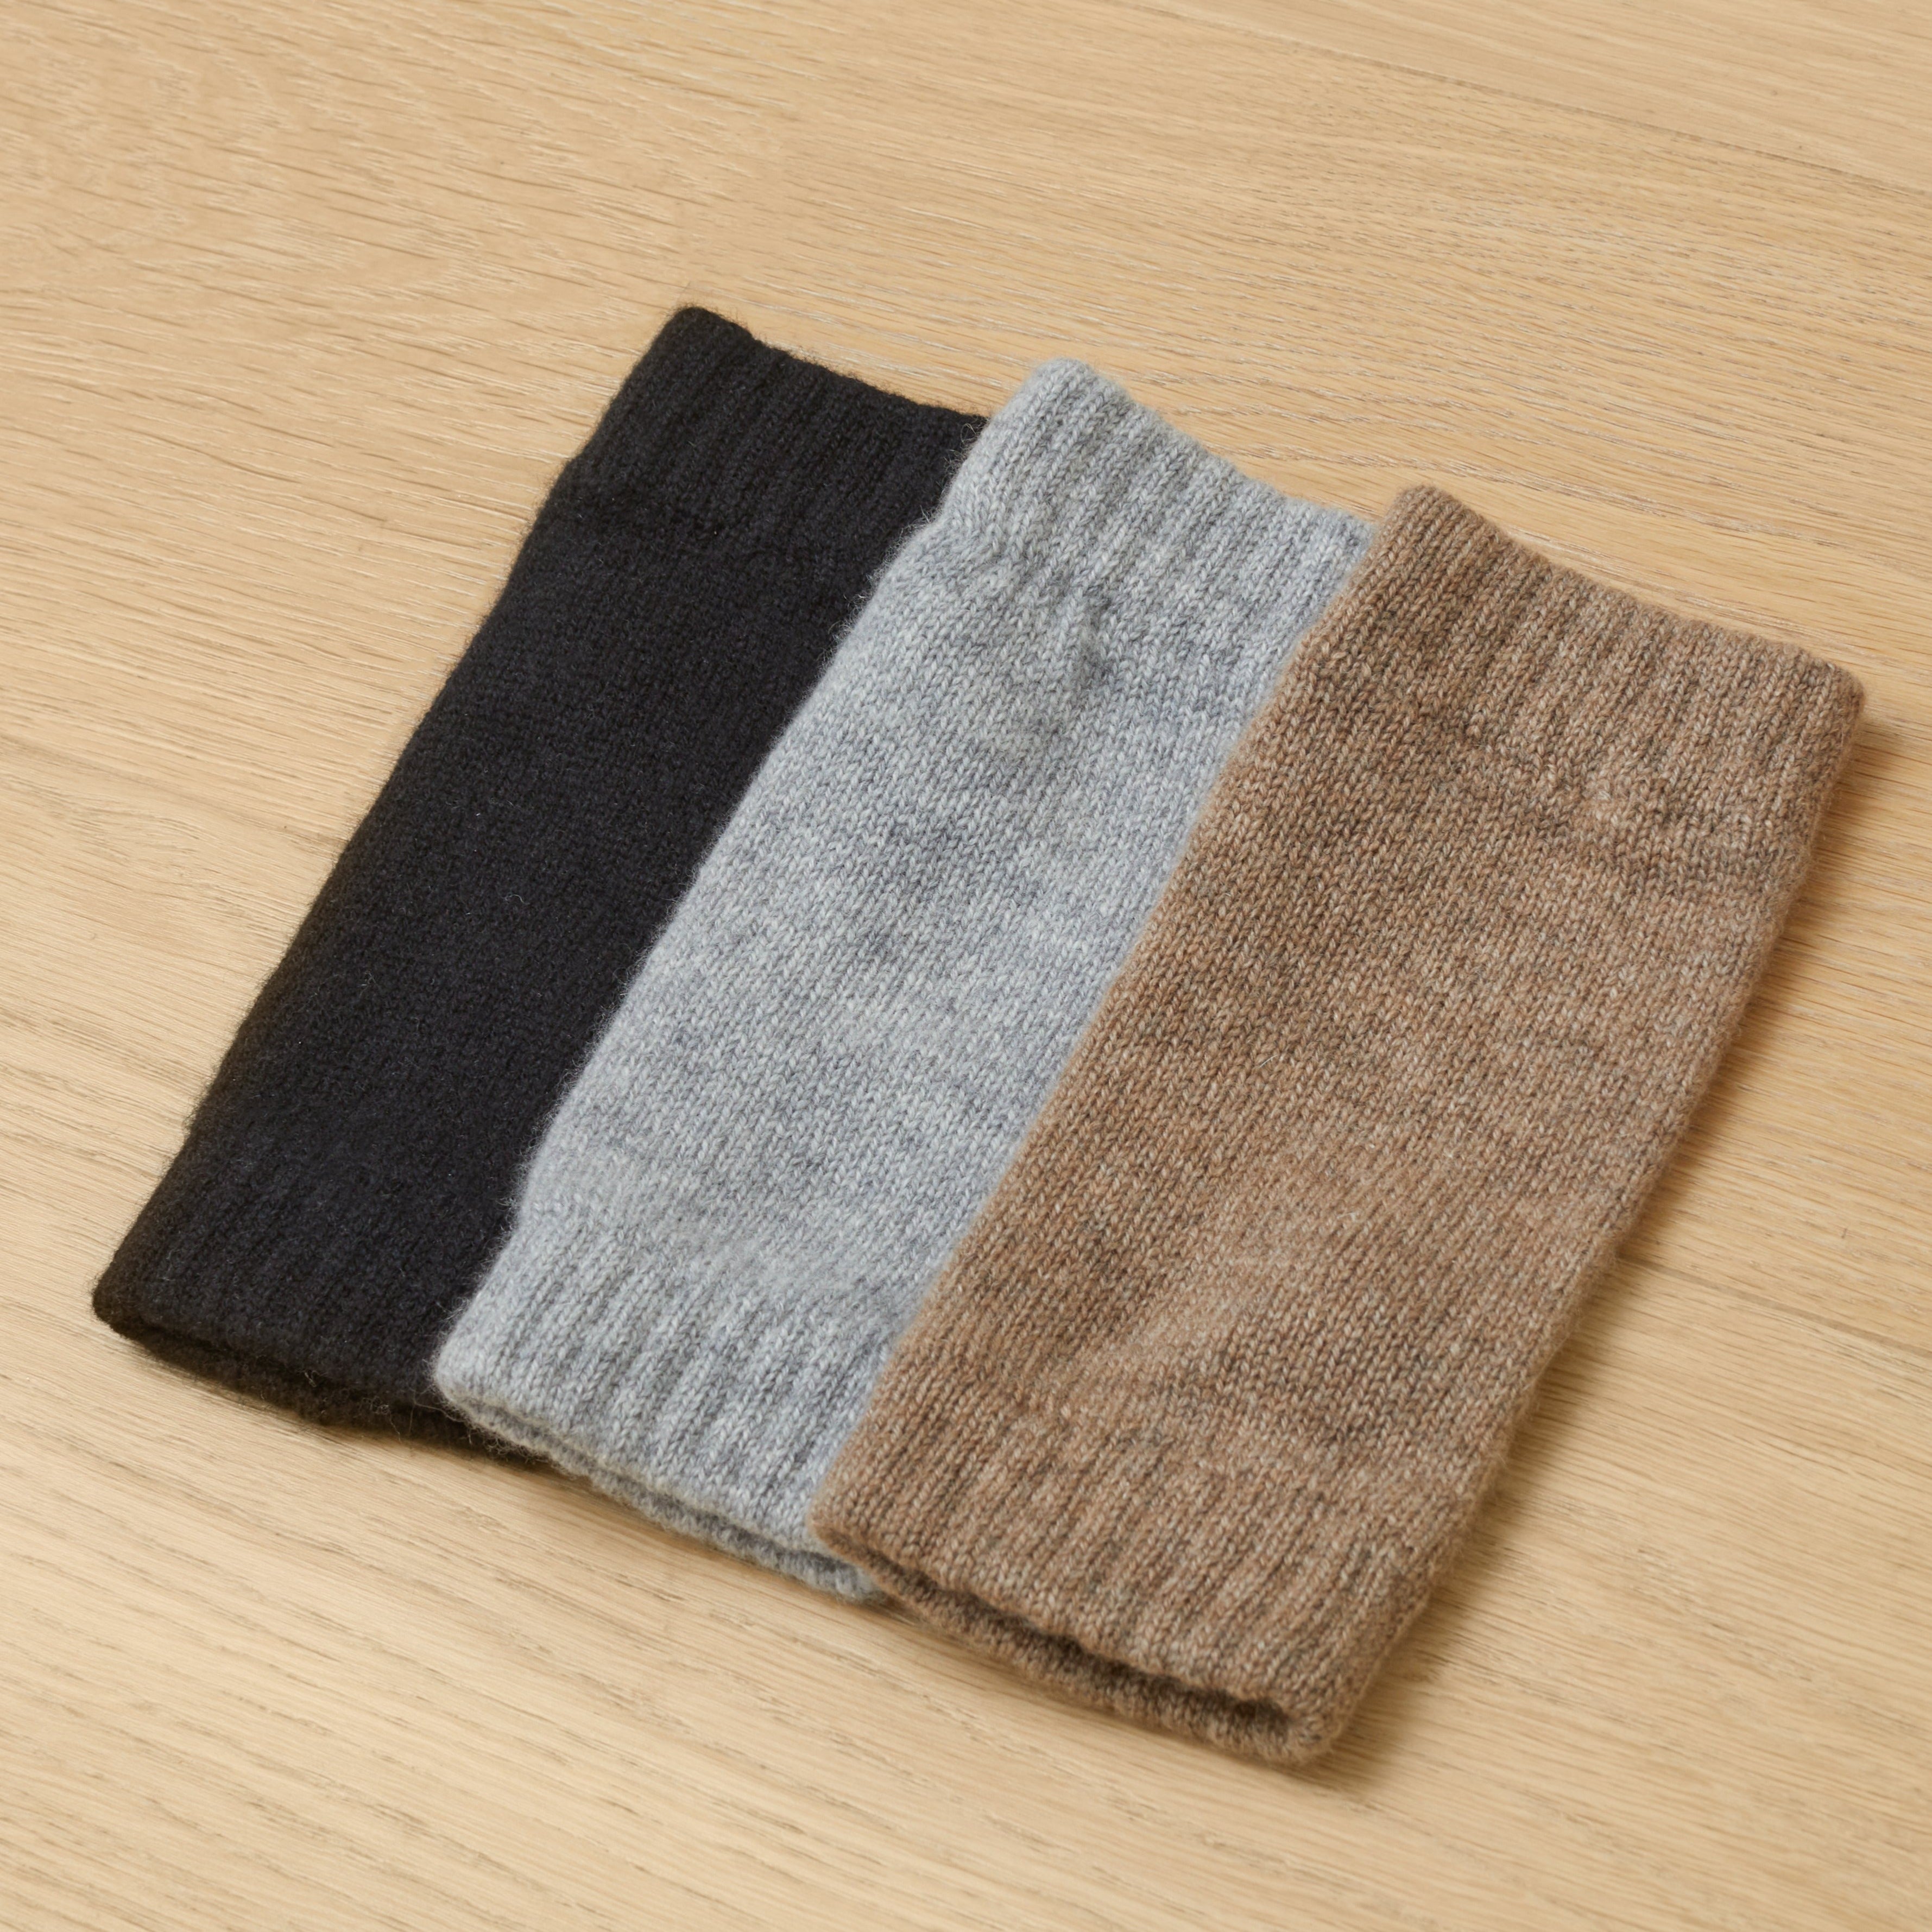 100% Cashmere Wrist Warmers in Black, Light Grey, and Mocha